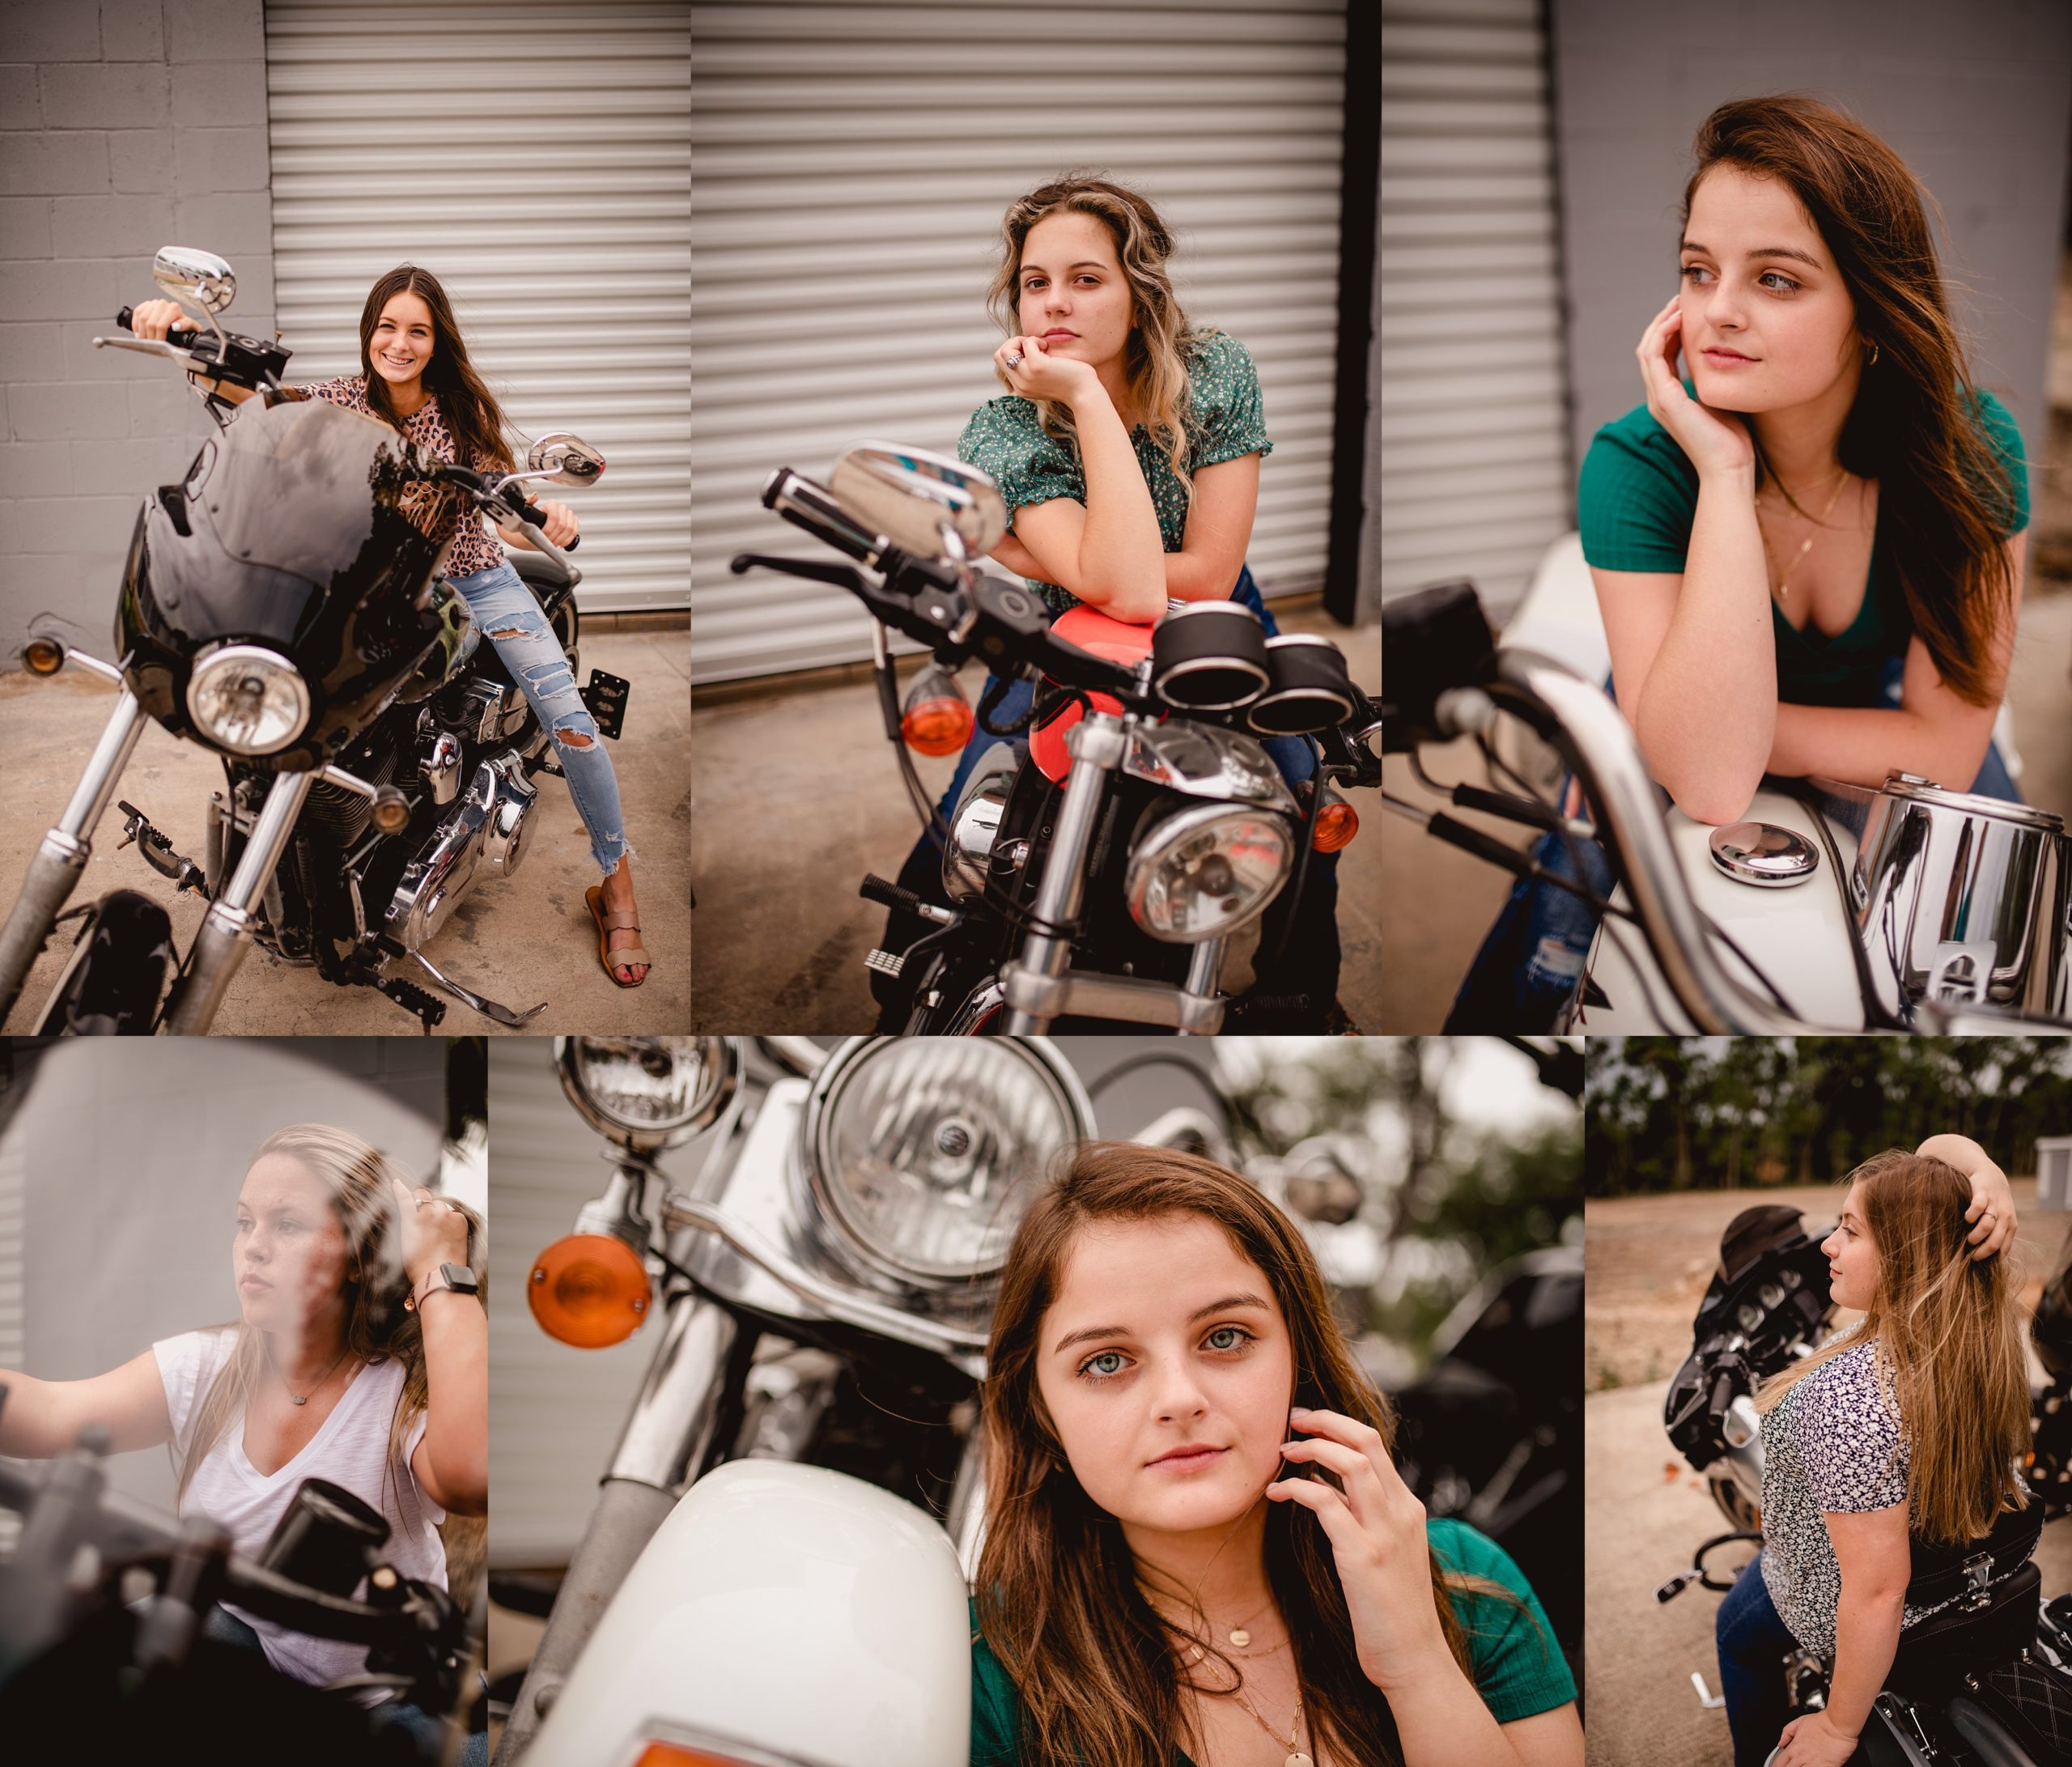 Model team ideas with motorcycles in North Florida.